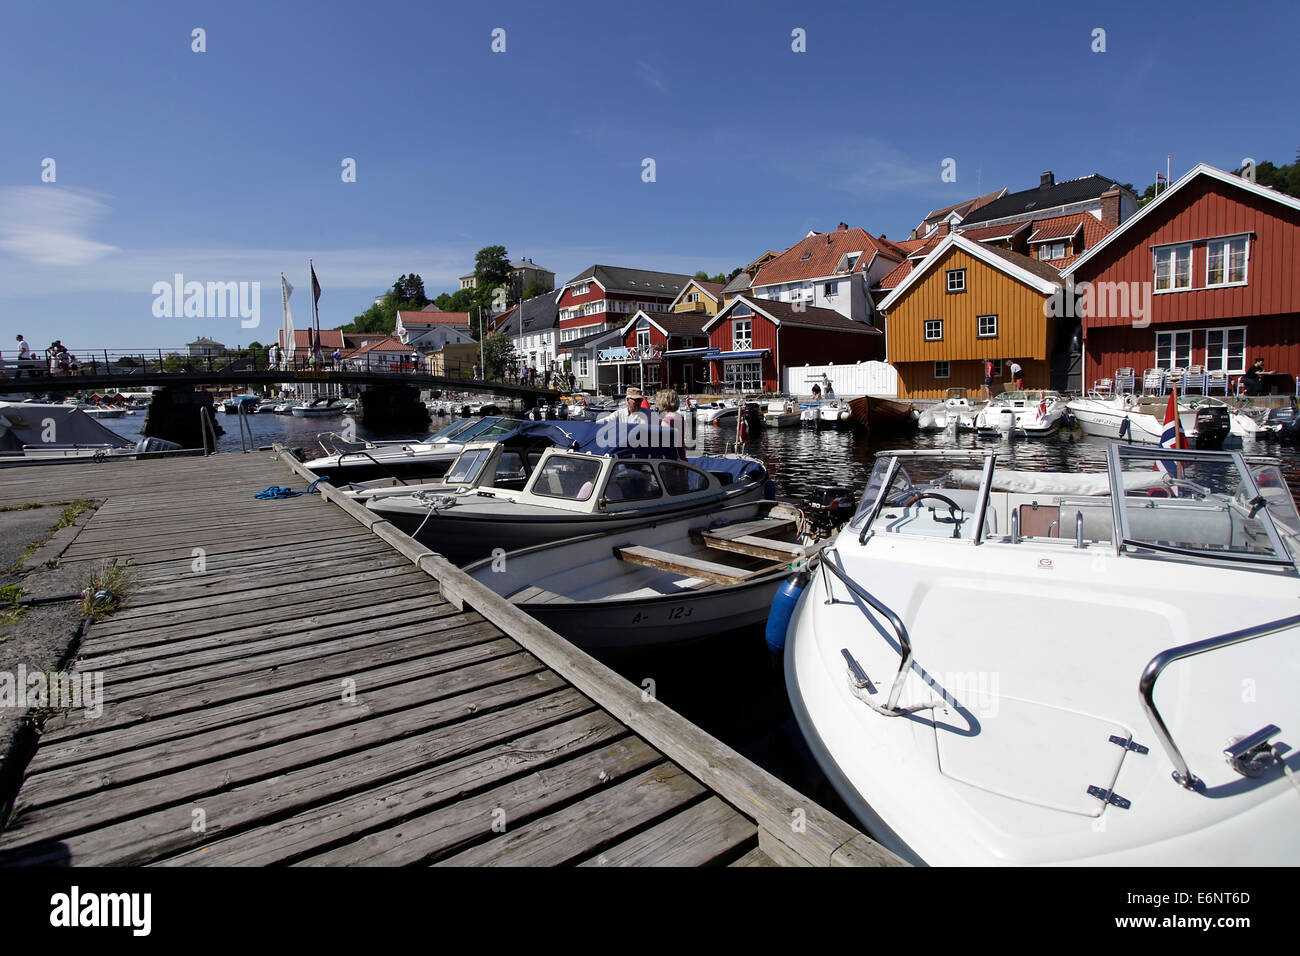 Narrow alleys and picturesque colorful wooden houses characterize Kragero that spread over three islands on the south coast of Norway on Skaggerak. Photo: Klaus Nowottnick Date: May 30, 2014 Stock Photo